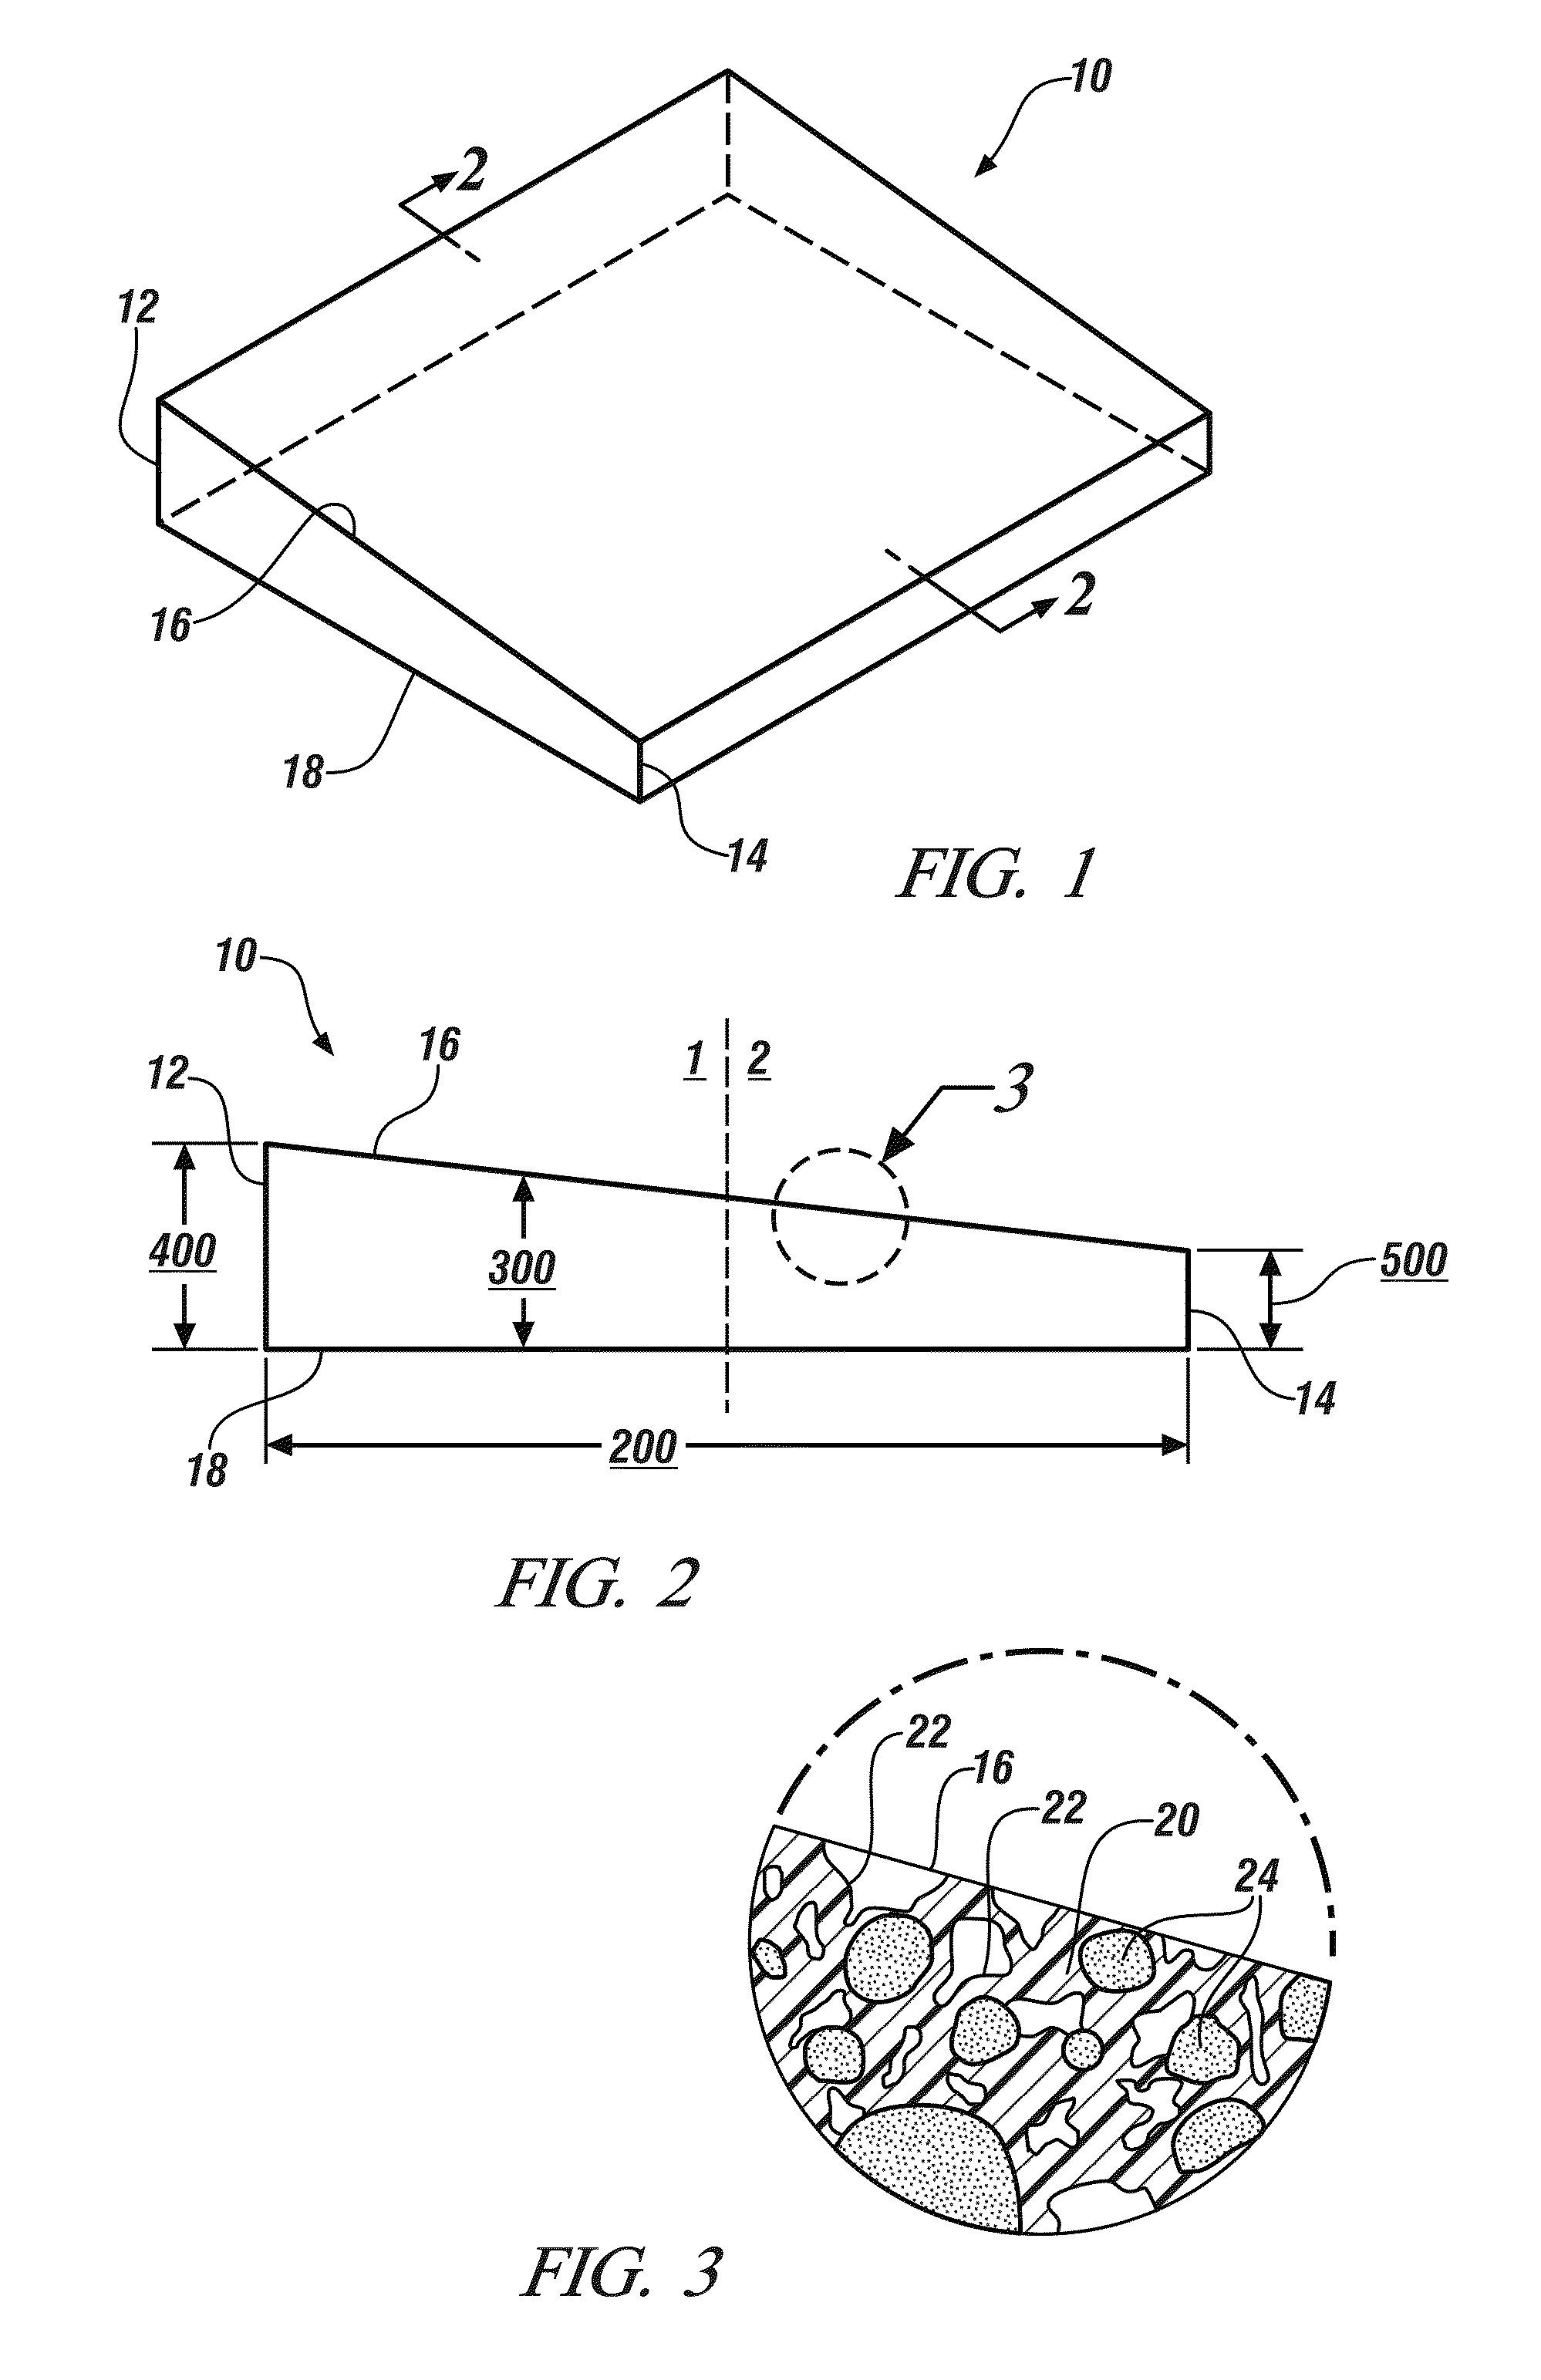 Porous polymer separator layer having a non-uniform cross sectional thickness for use in a secondary liquid electrolyte battery